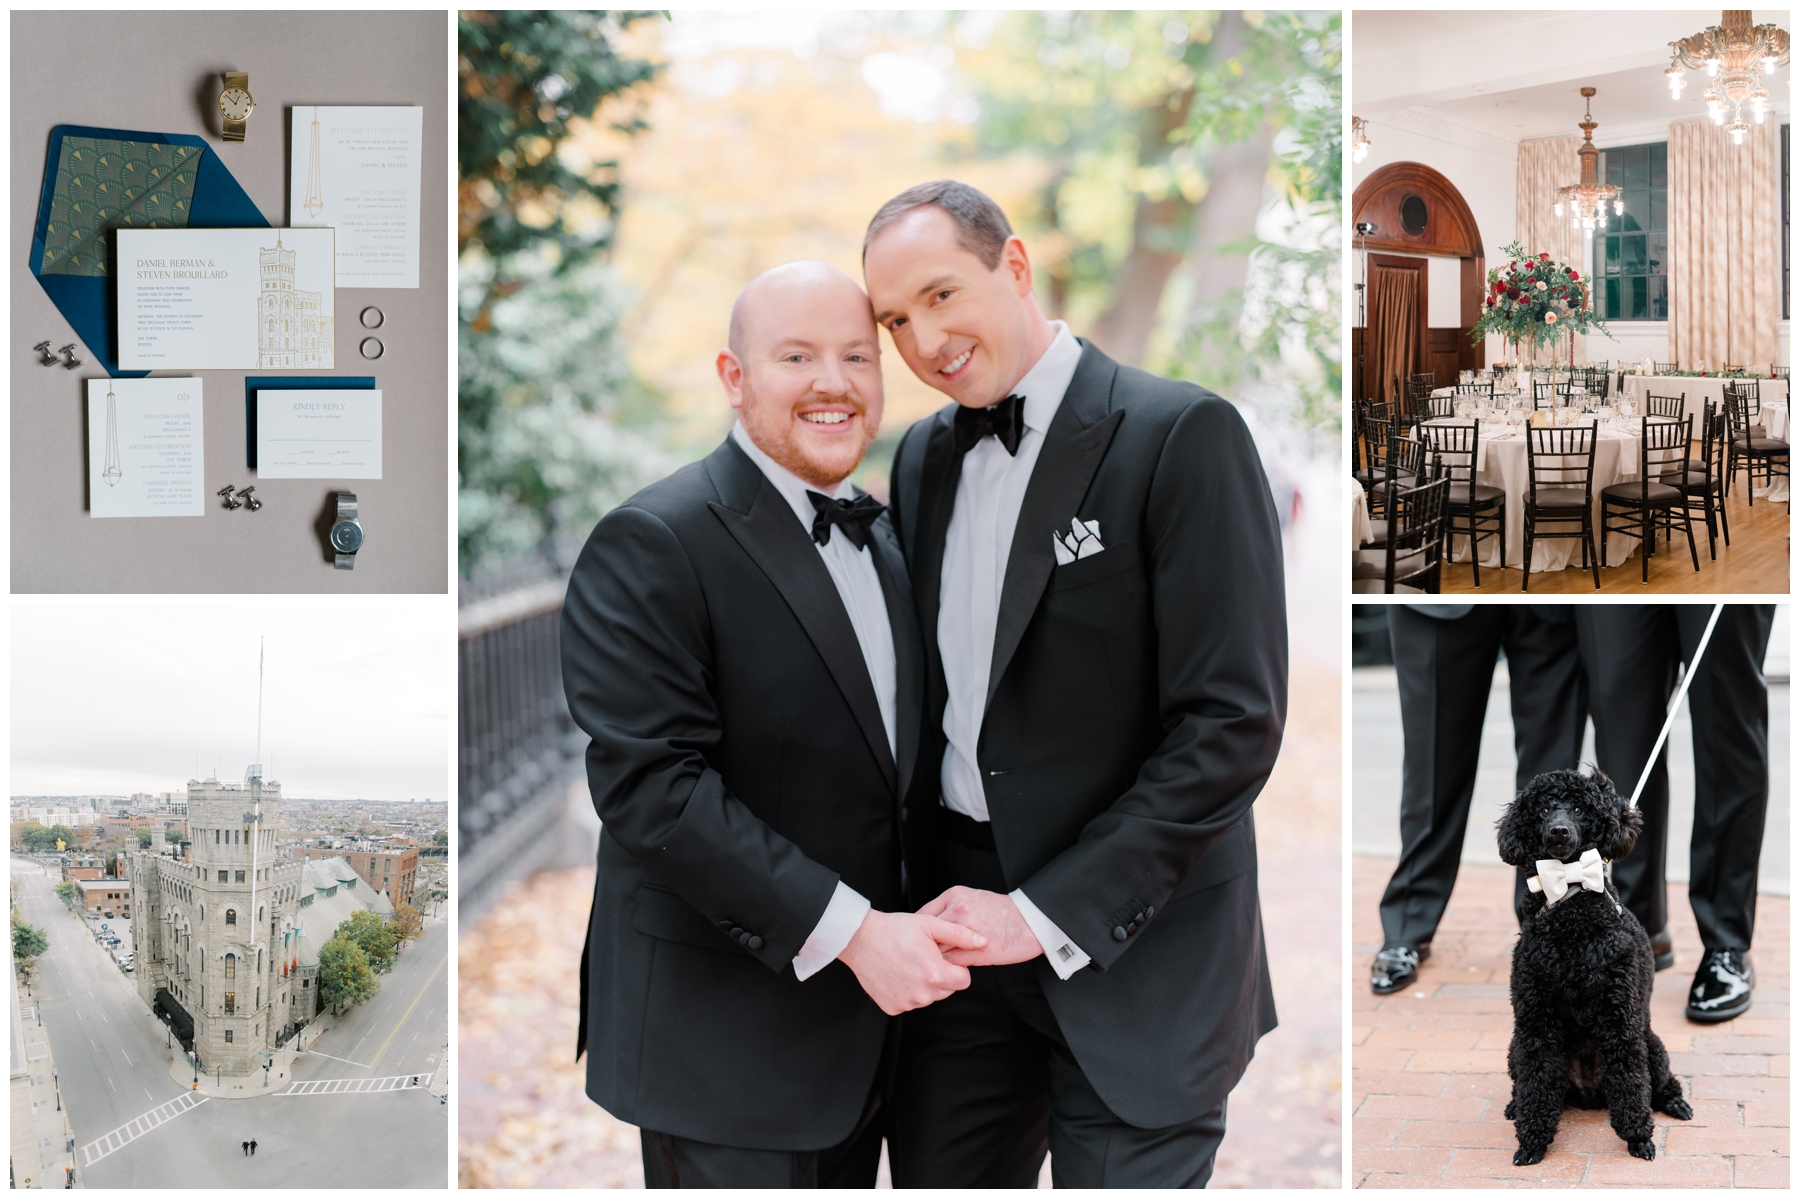 Timeless Boston Wedding At The Tower: A Longwood Venue